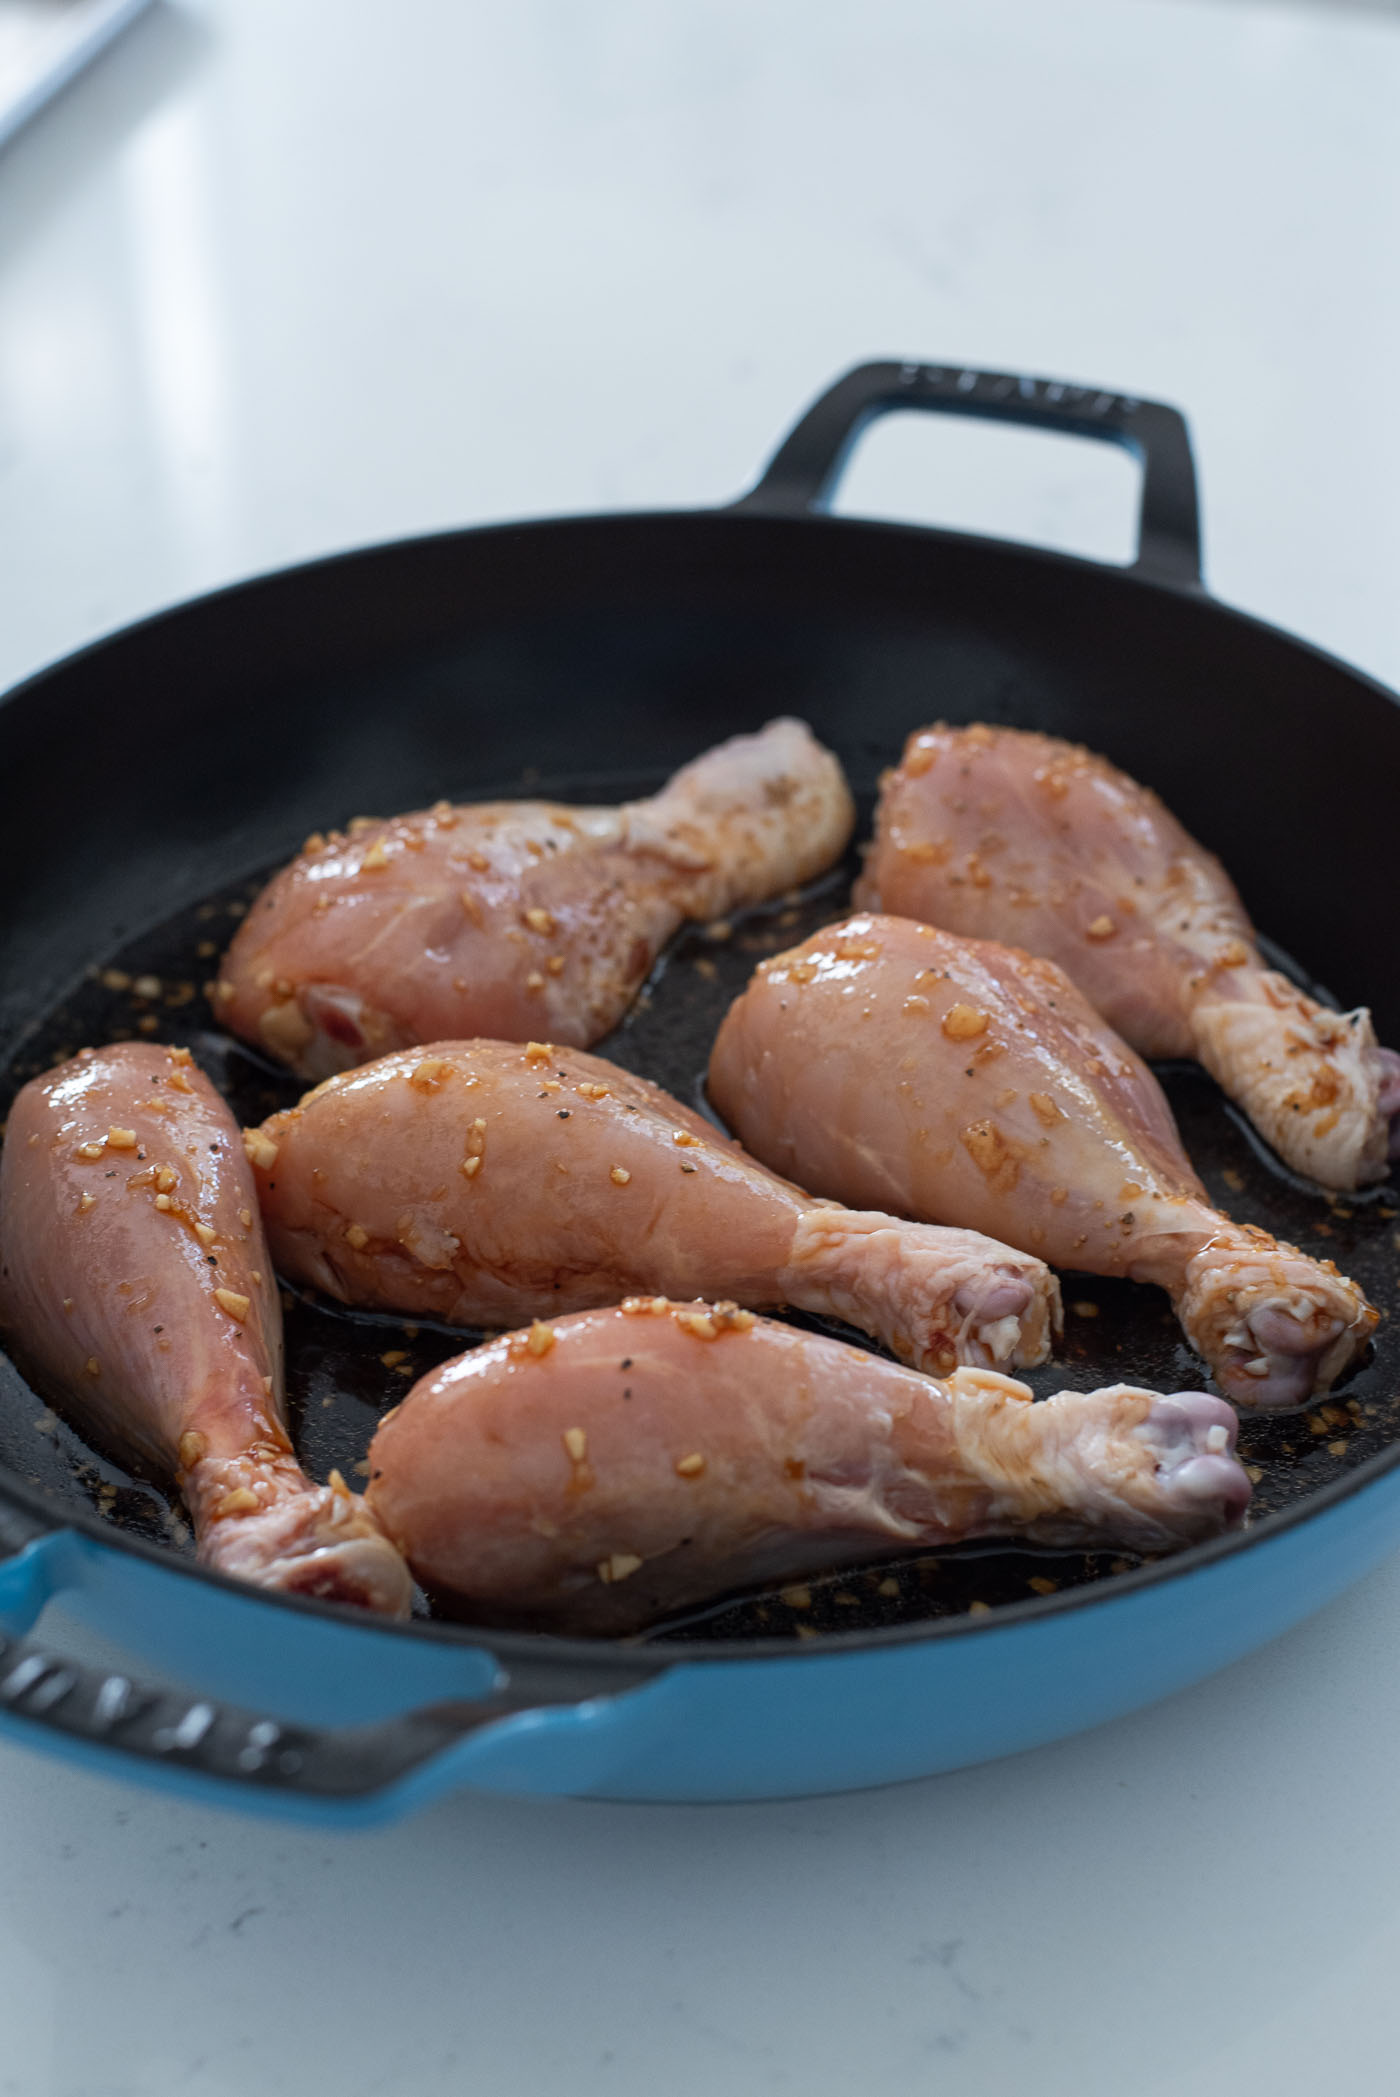 Teriyaki sauce is poured onto chicken drumsticks in the pan.